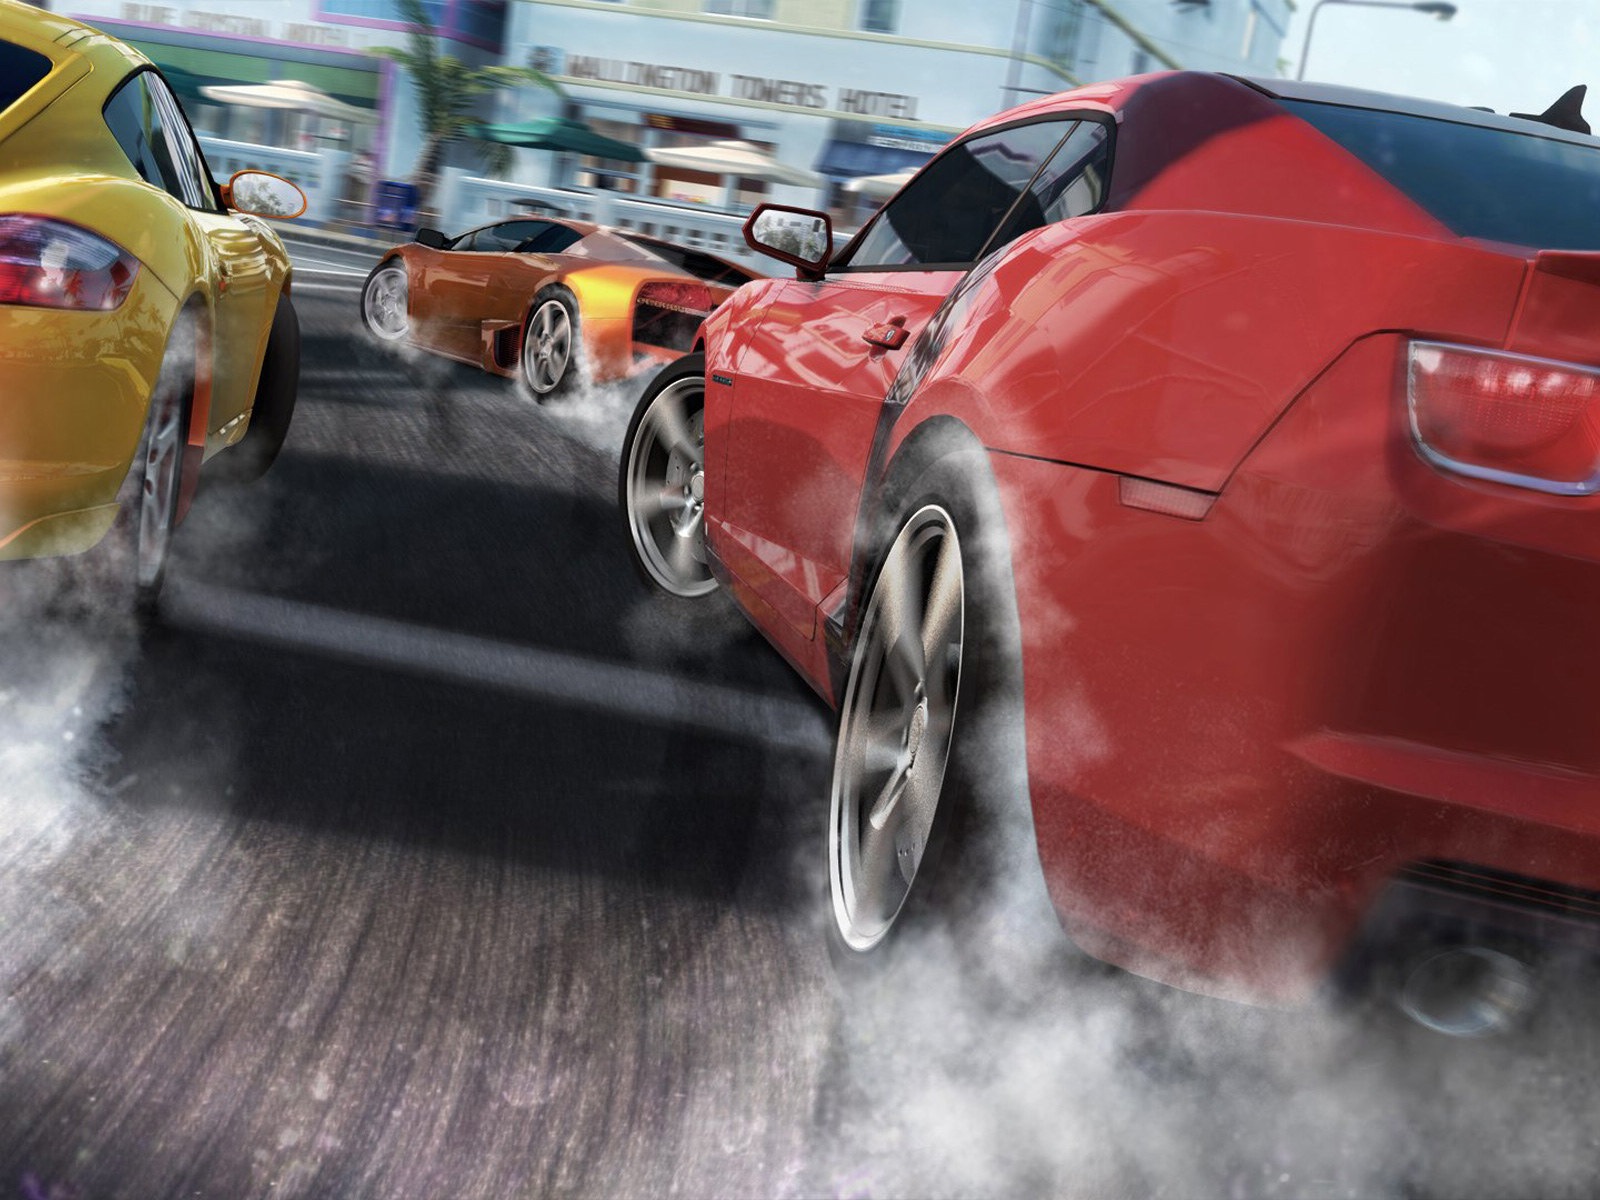 The Crew game HD wallpapers #6 - 1600x1200